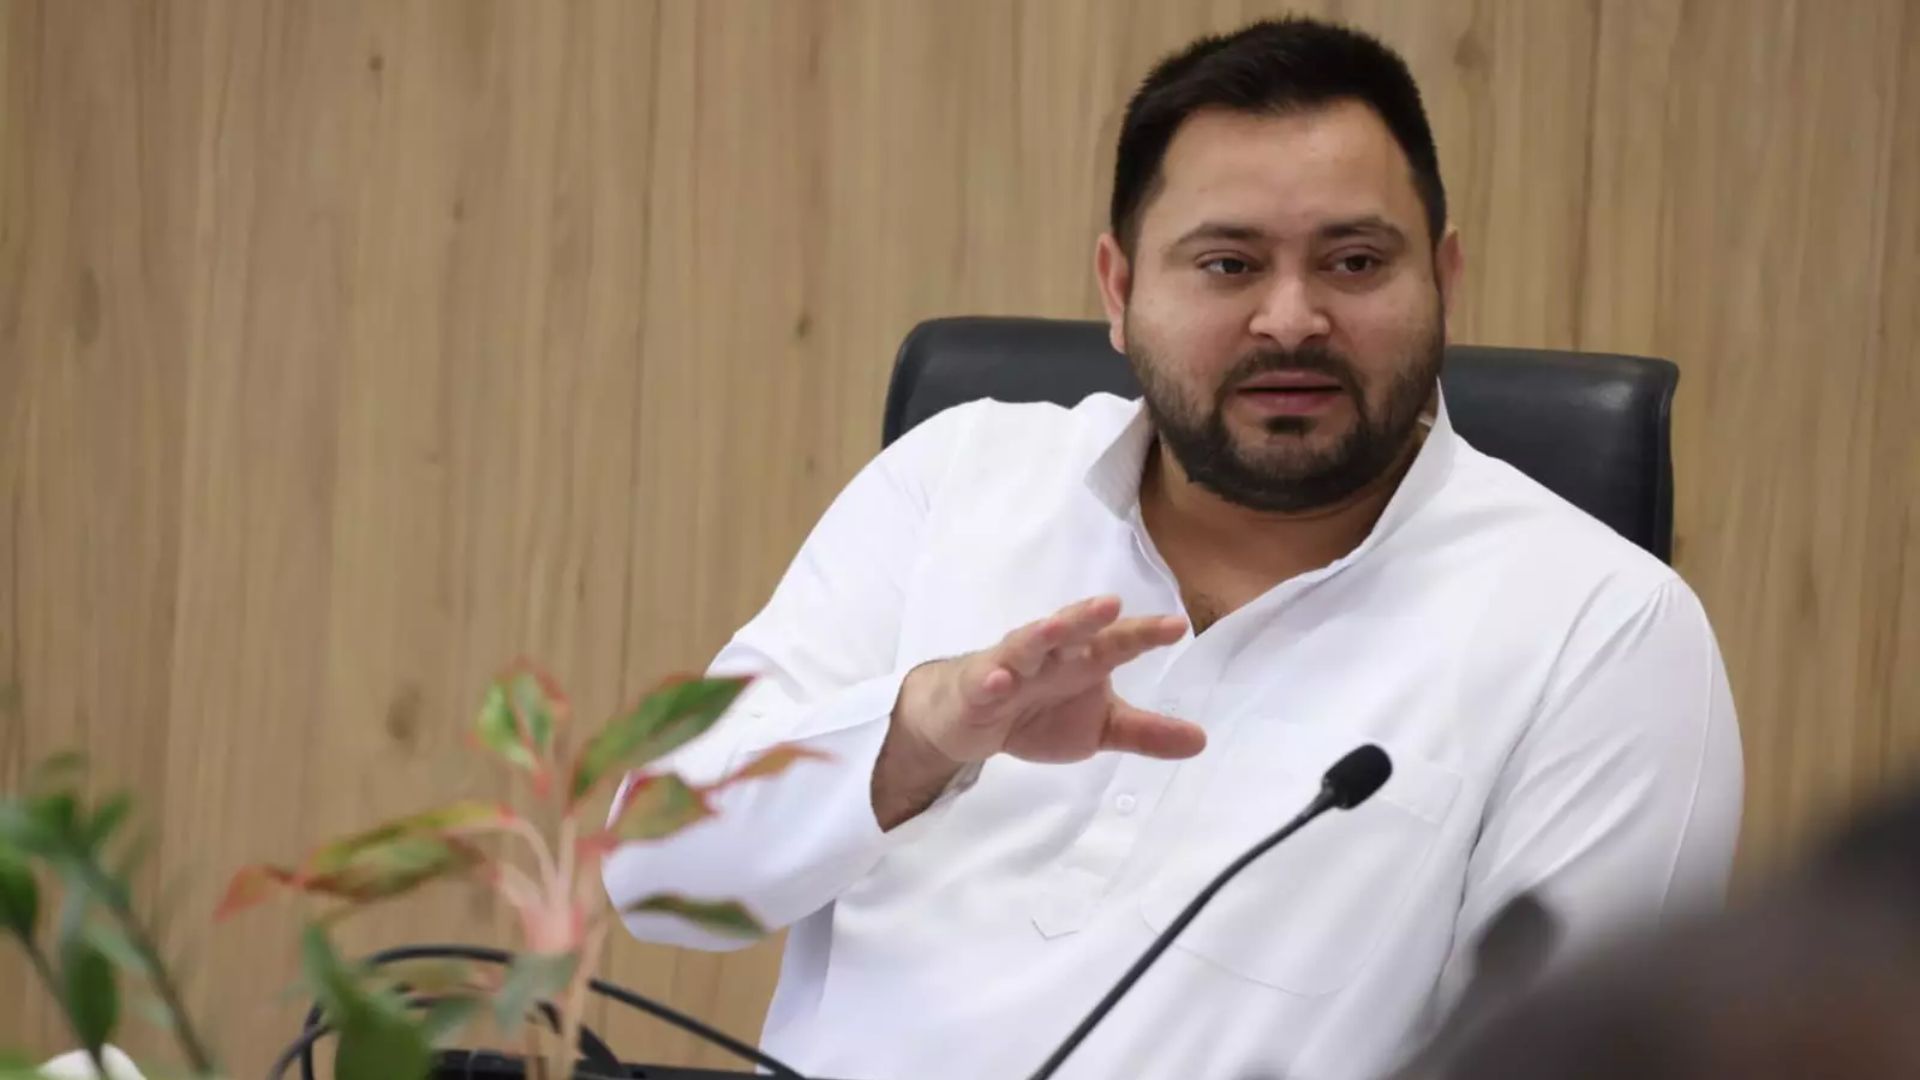 RJD leader Tejashwi Yadav Remarked On A Raja’s statement: “This is his personal statement”